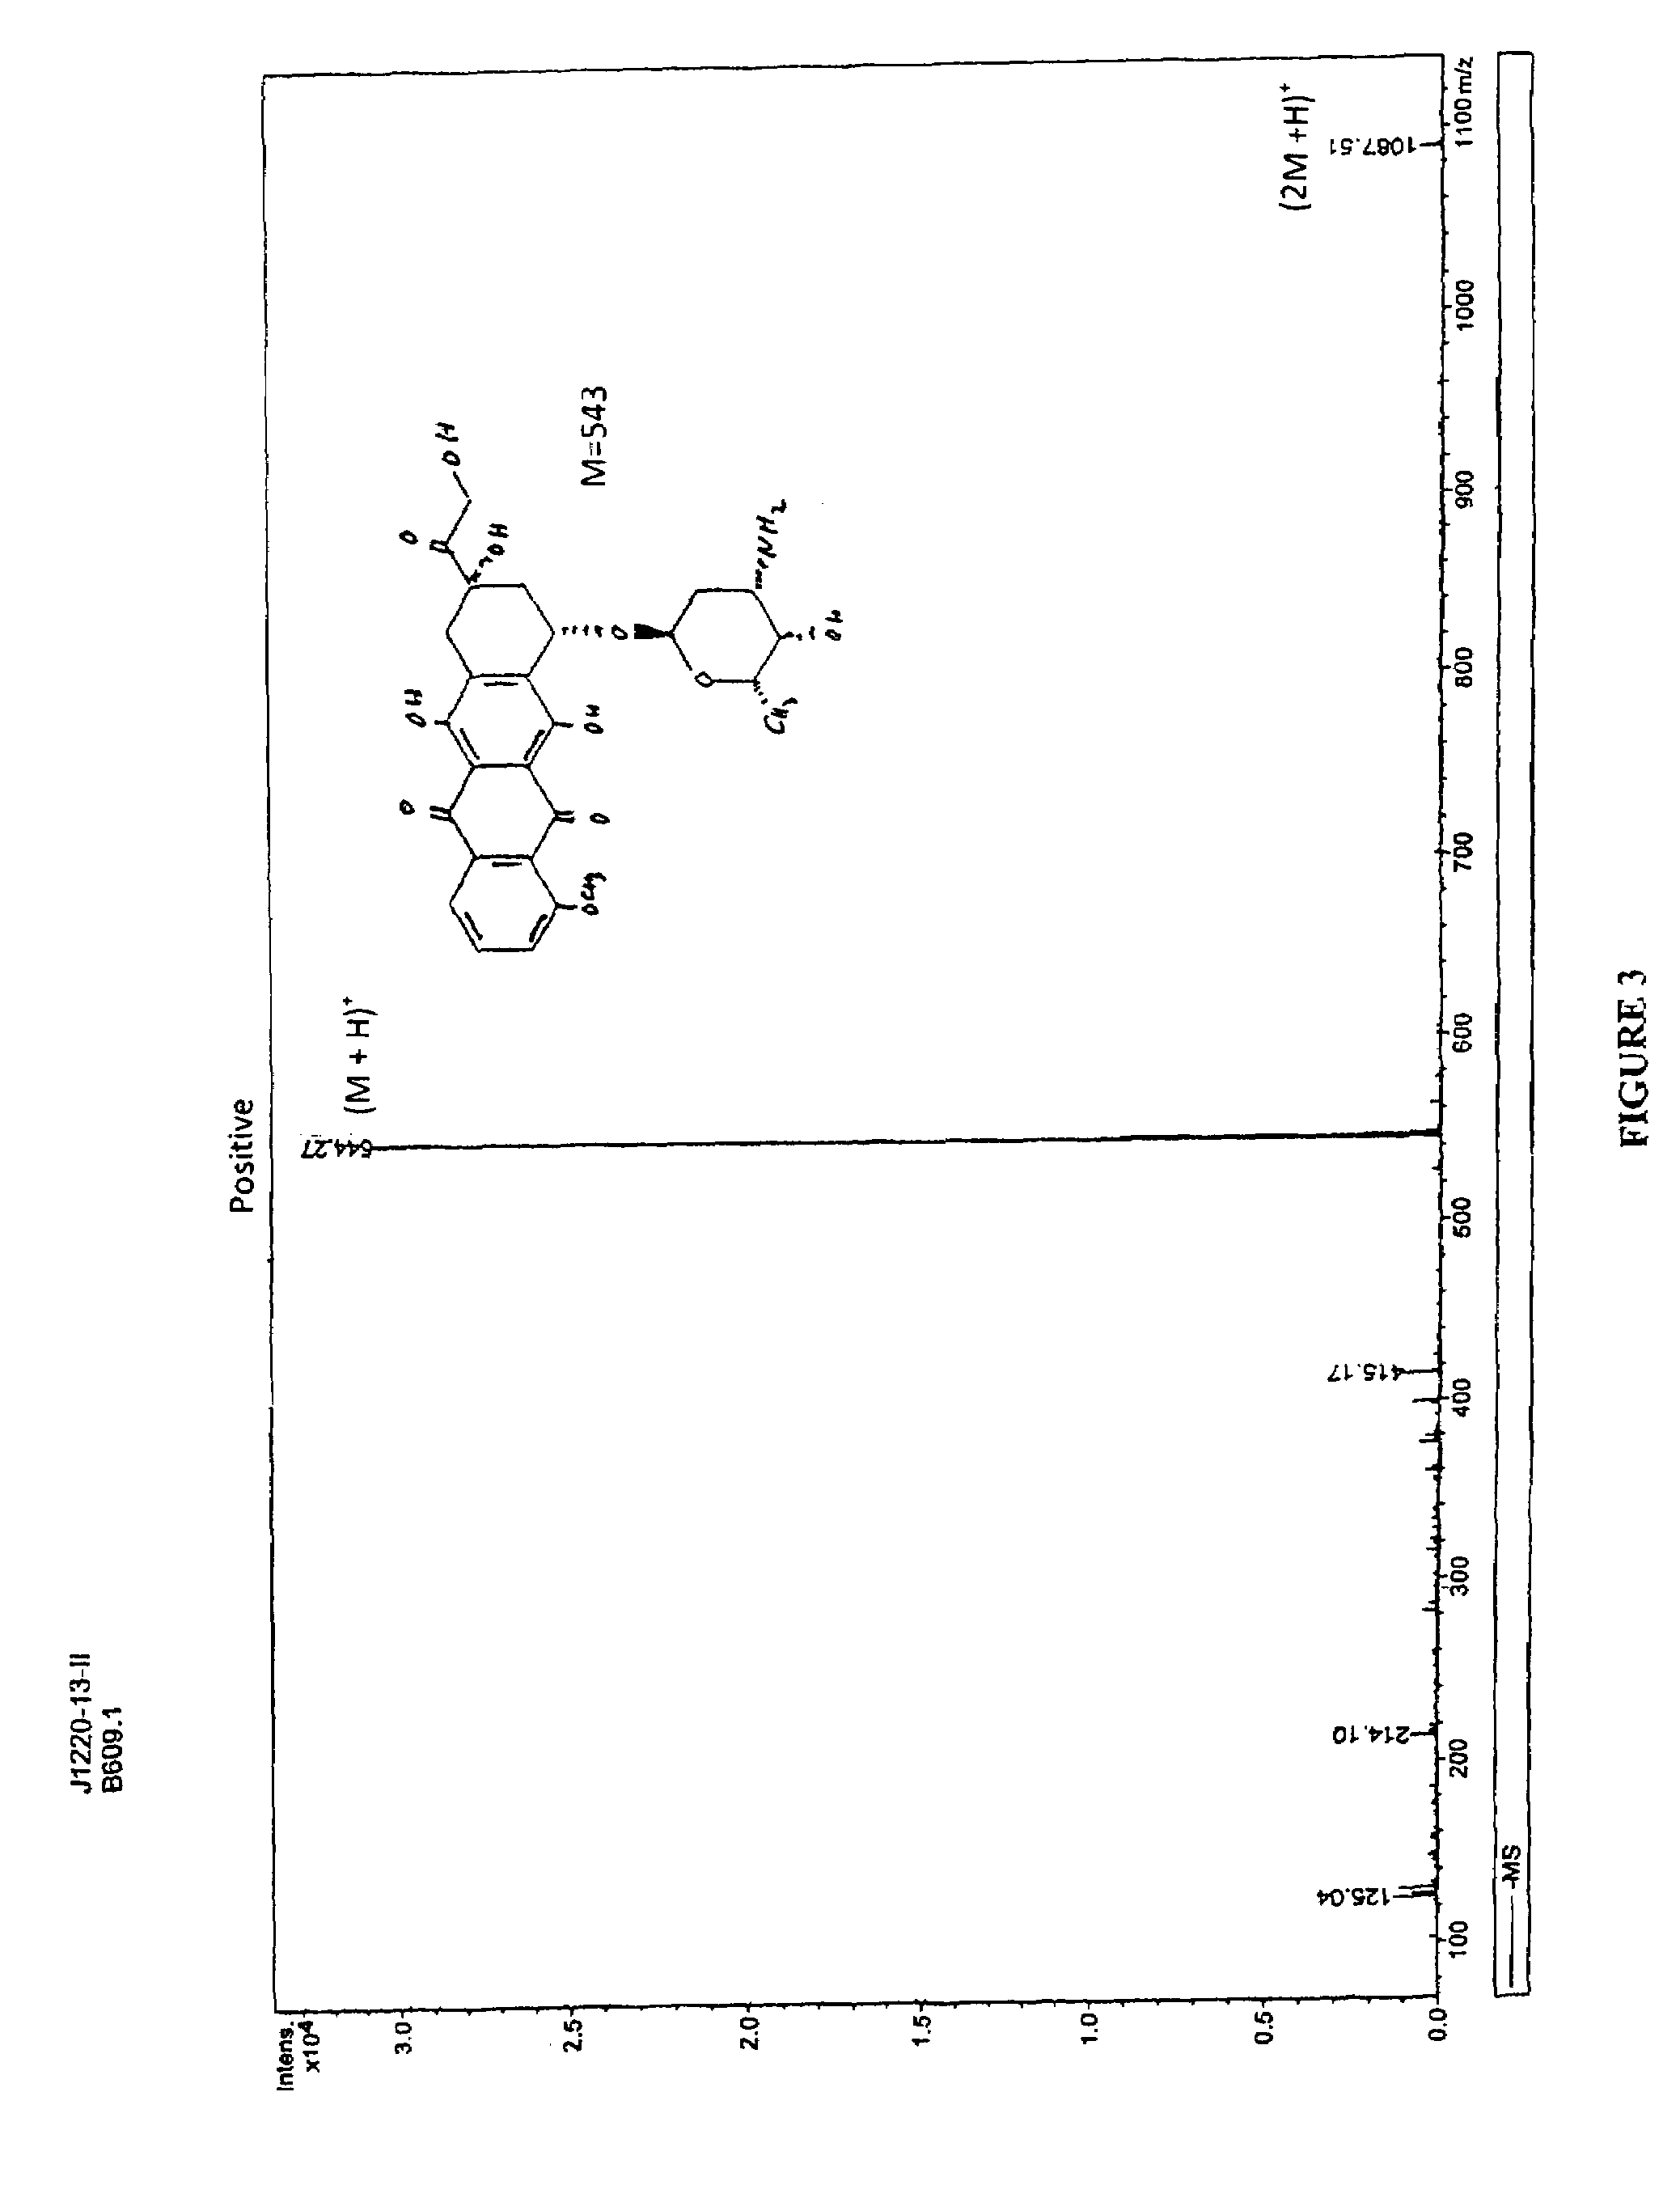 Compositions and methods of reducing tissue levels of drugs when given as orotate derivatives